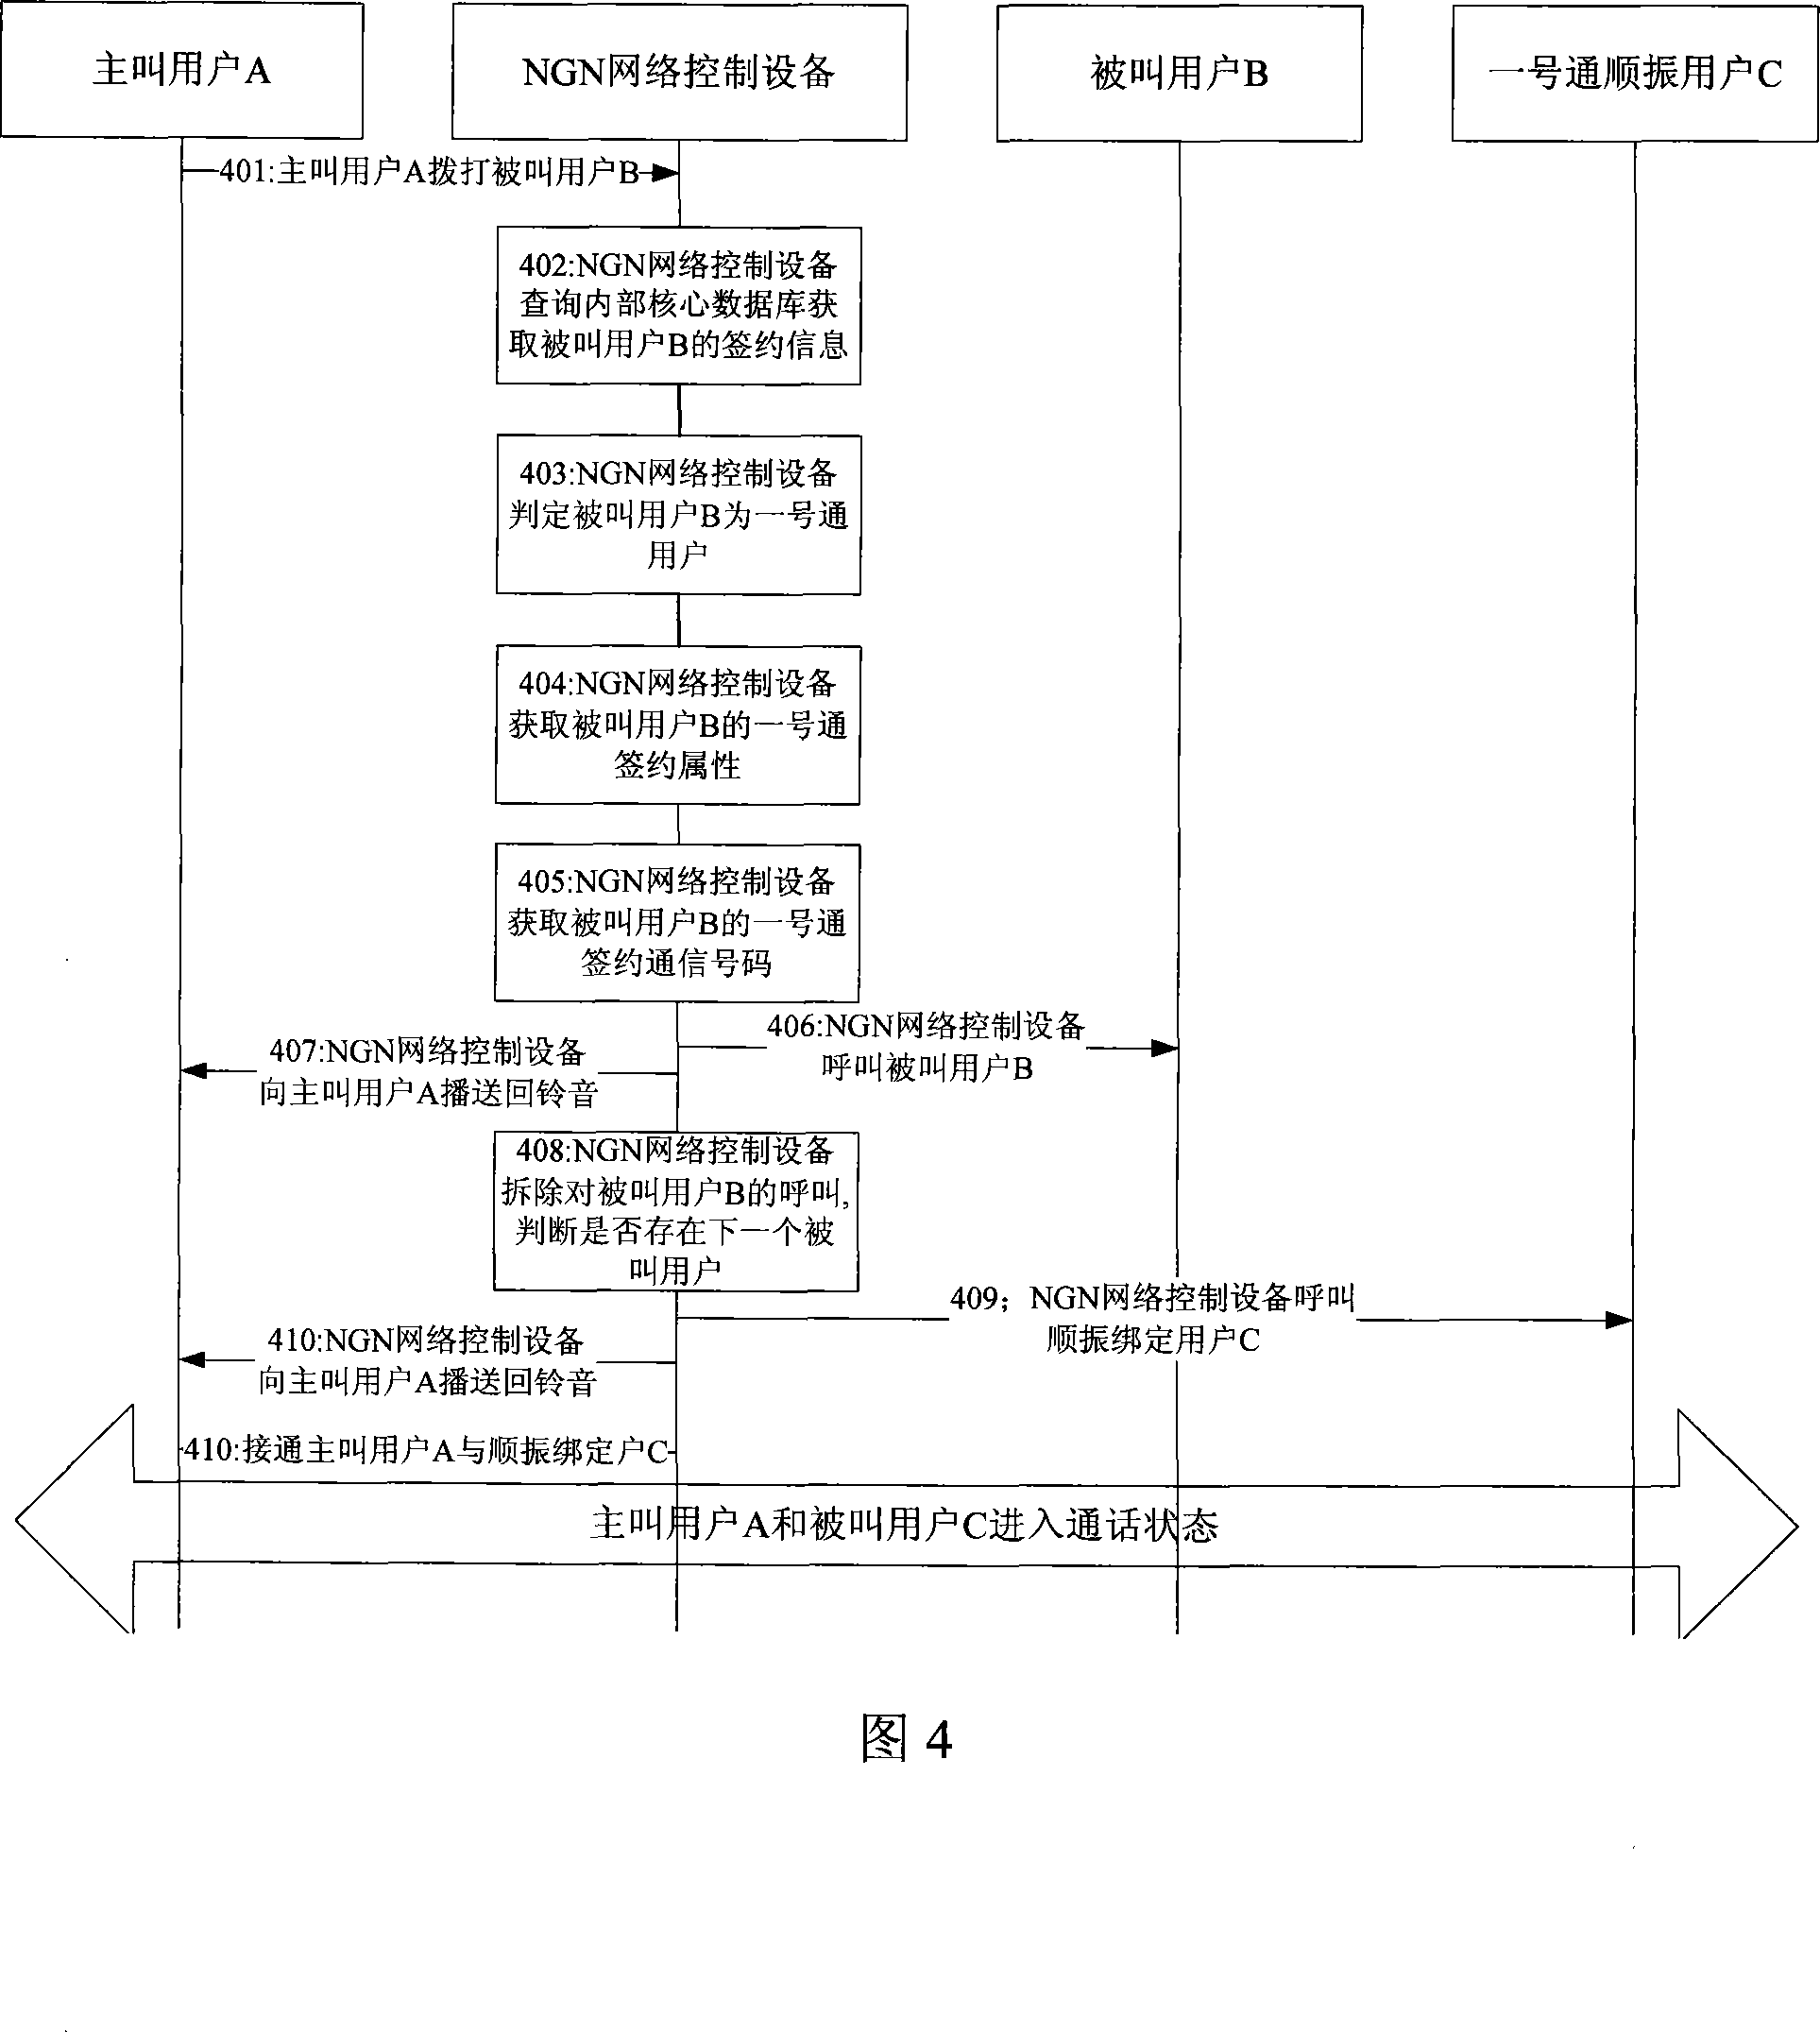 Method and system of implementing universal personal telecommunication service